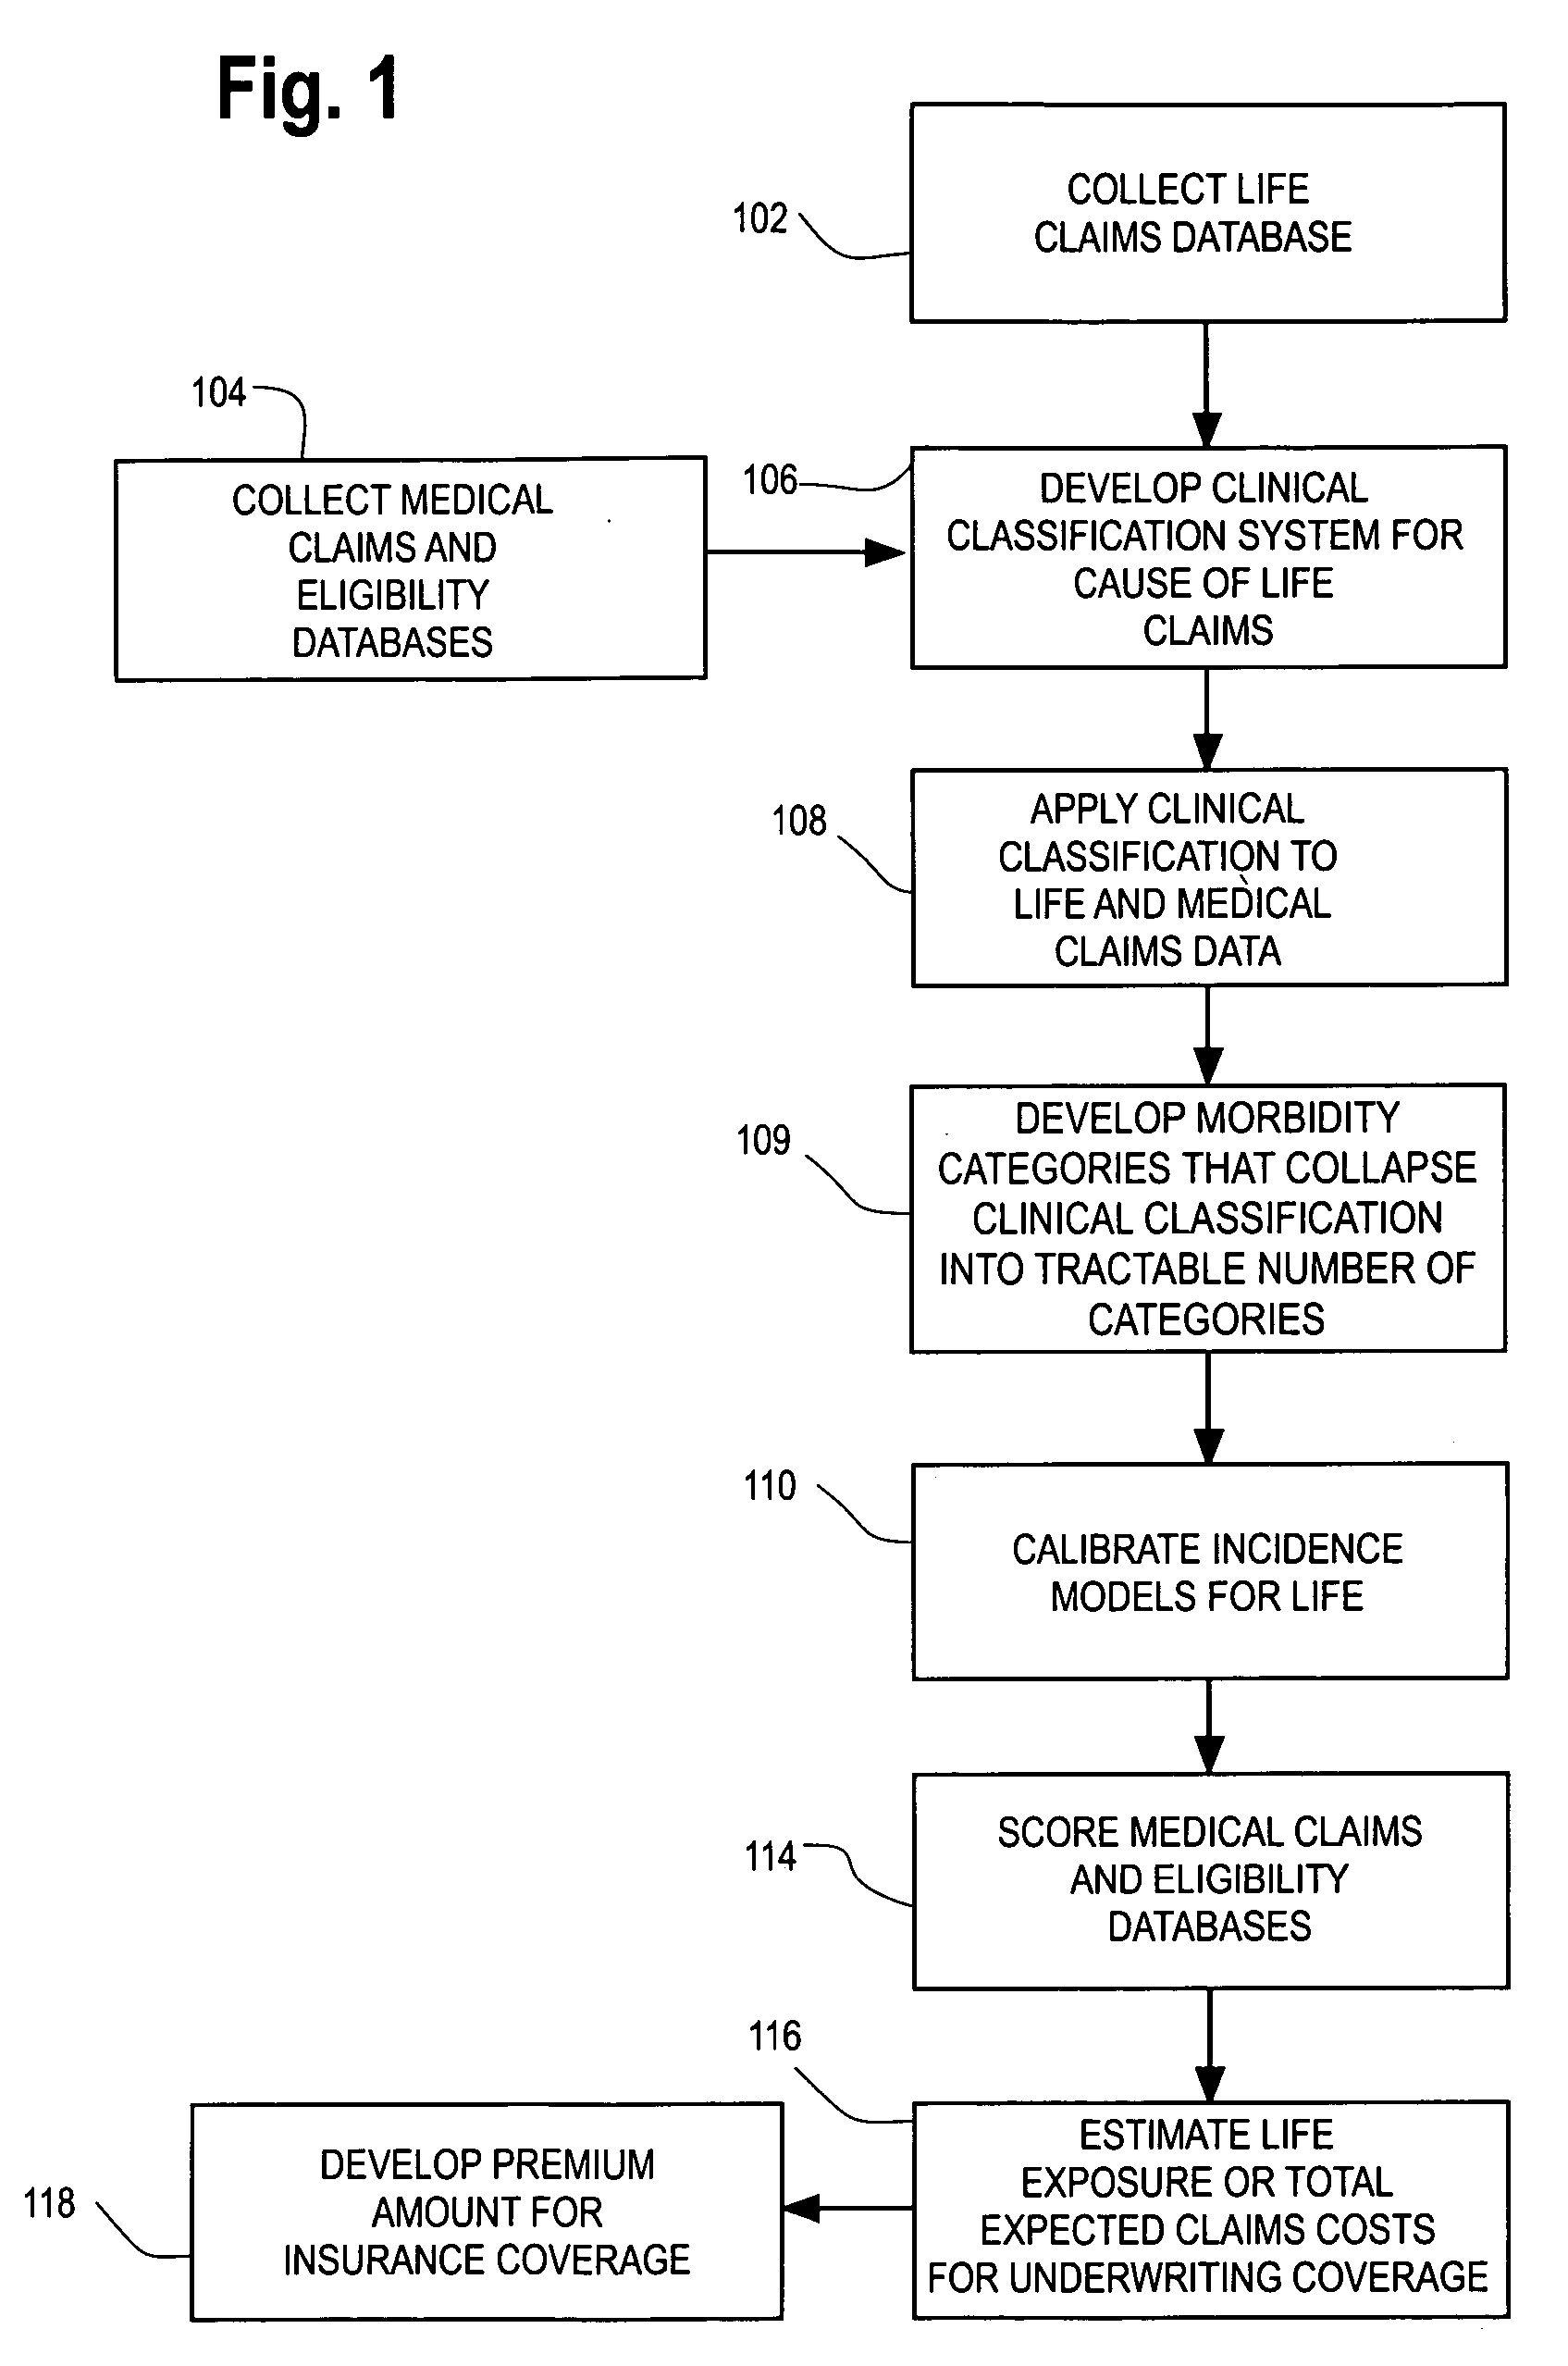 Computerized medical modeling of group life insurance using medical claims data